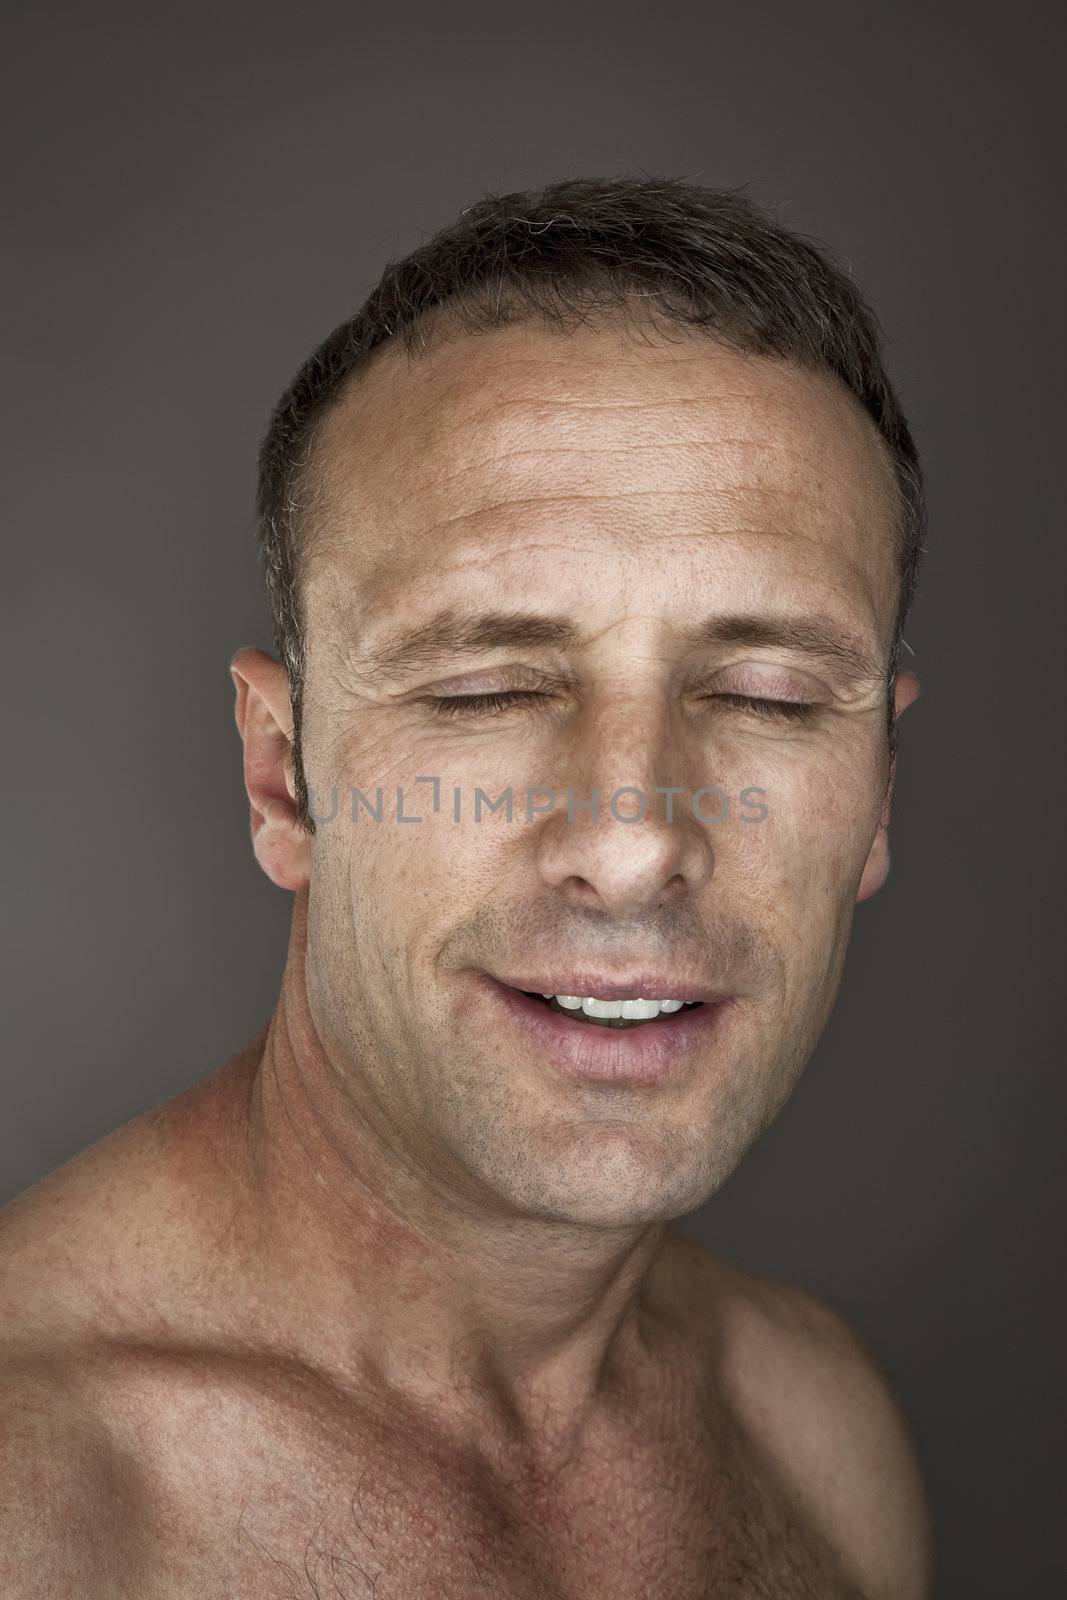 An image of a handsome man with closed eyes